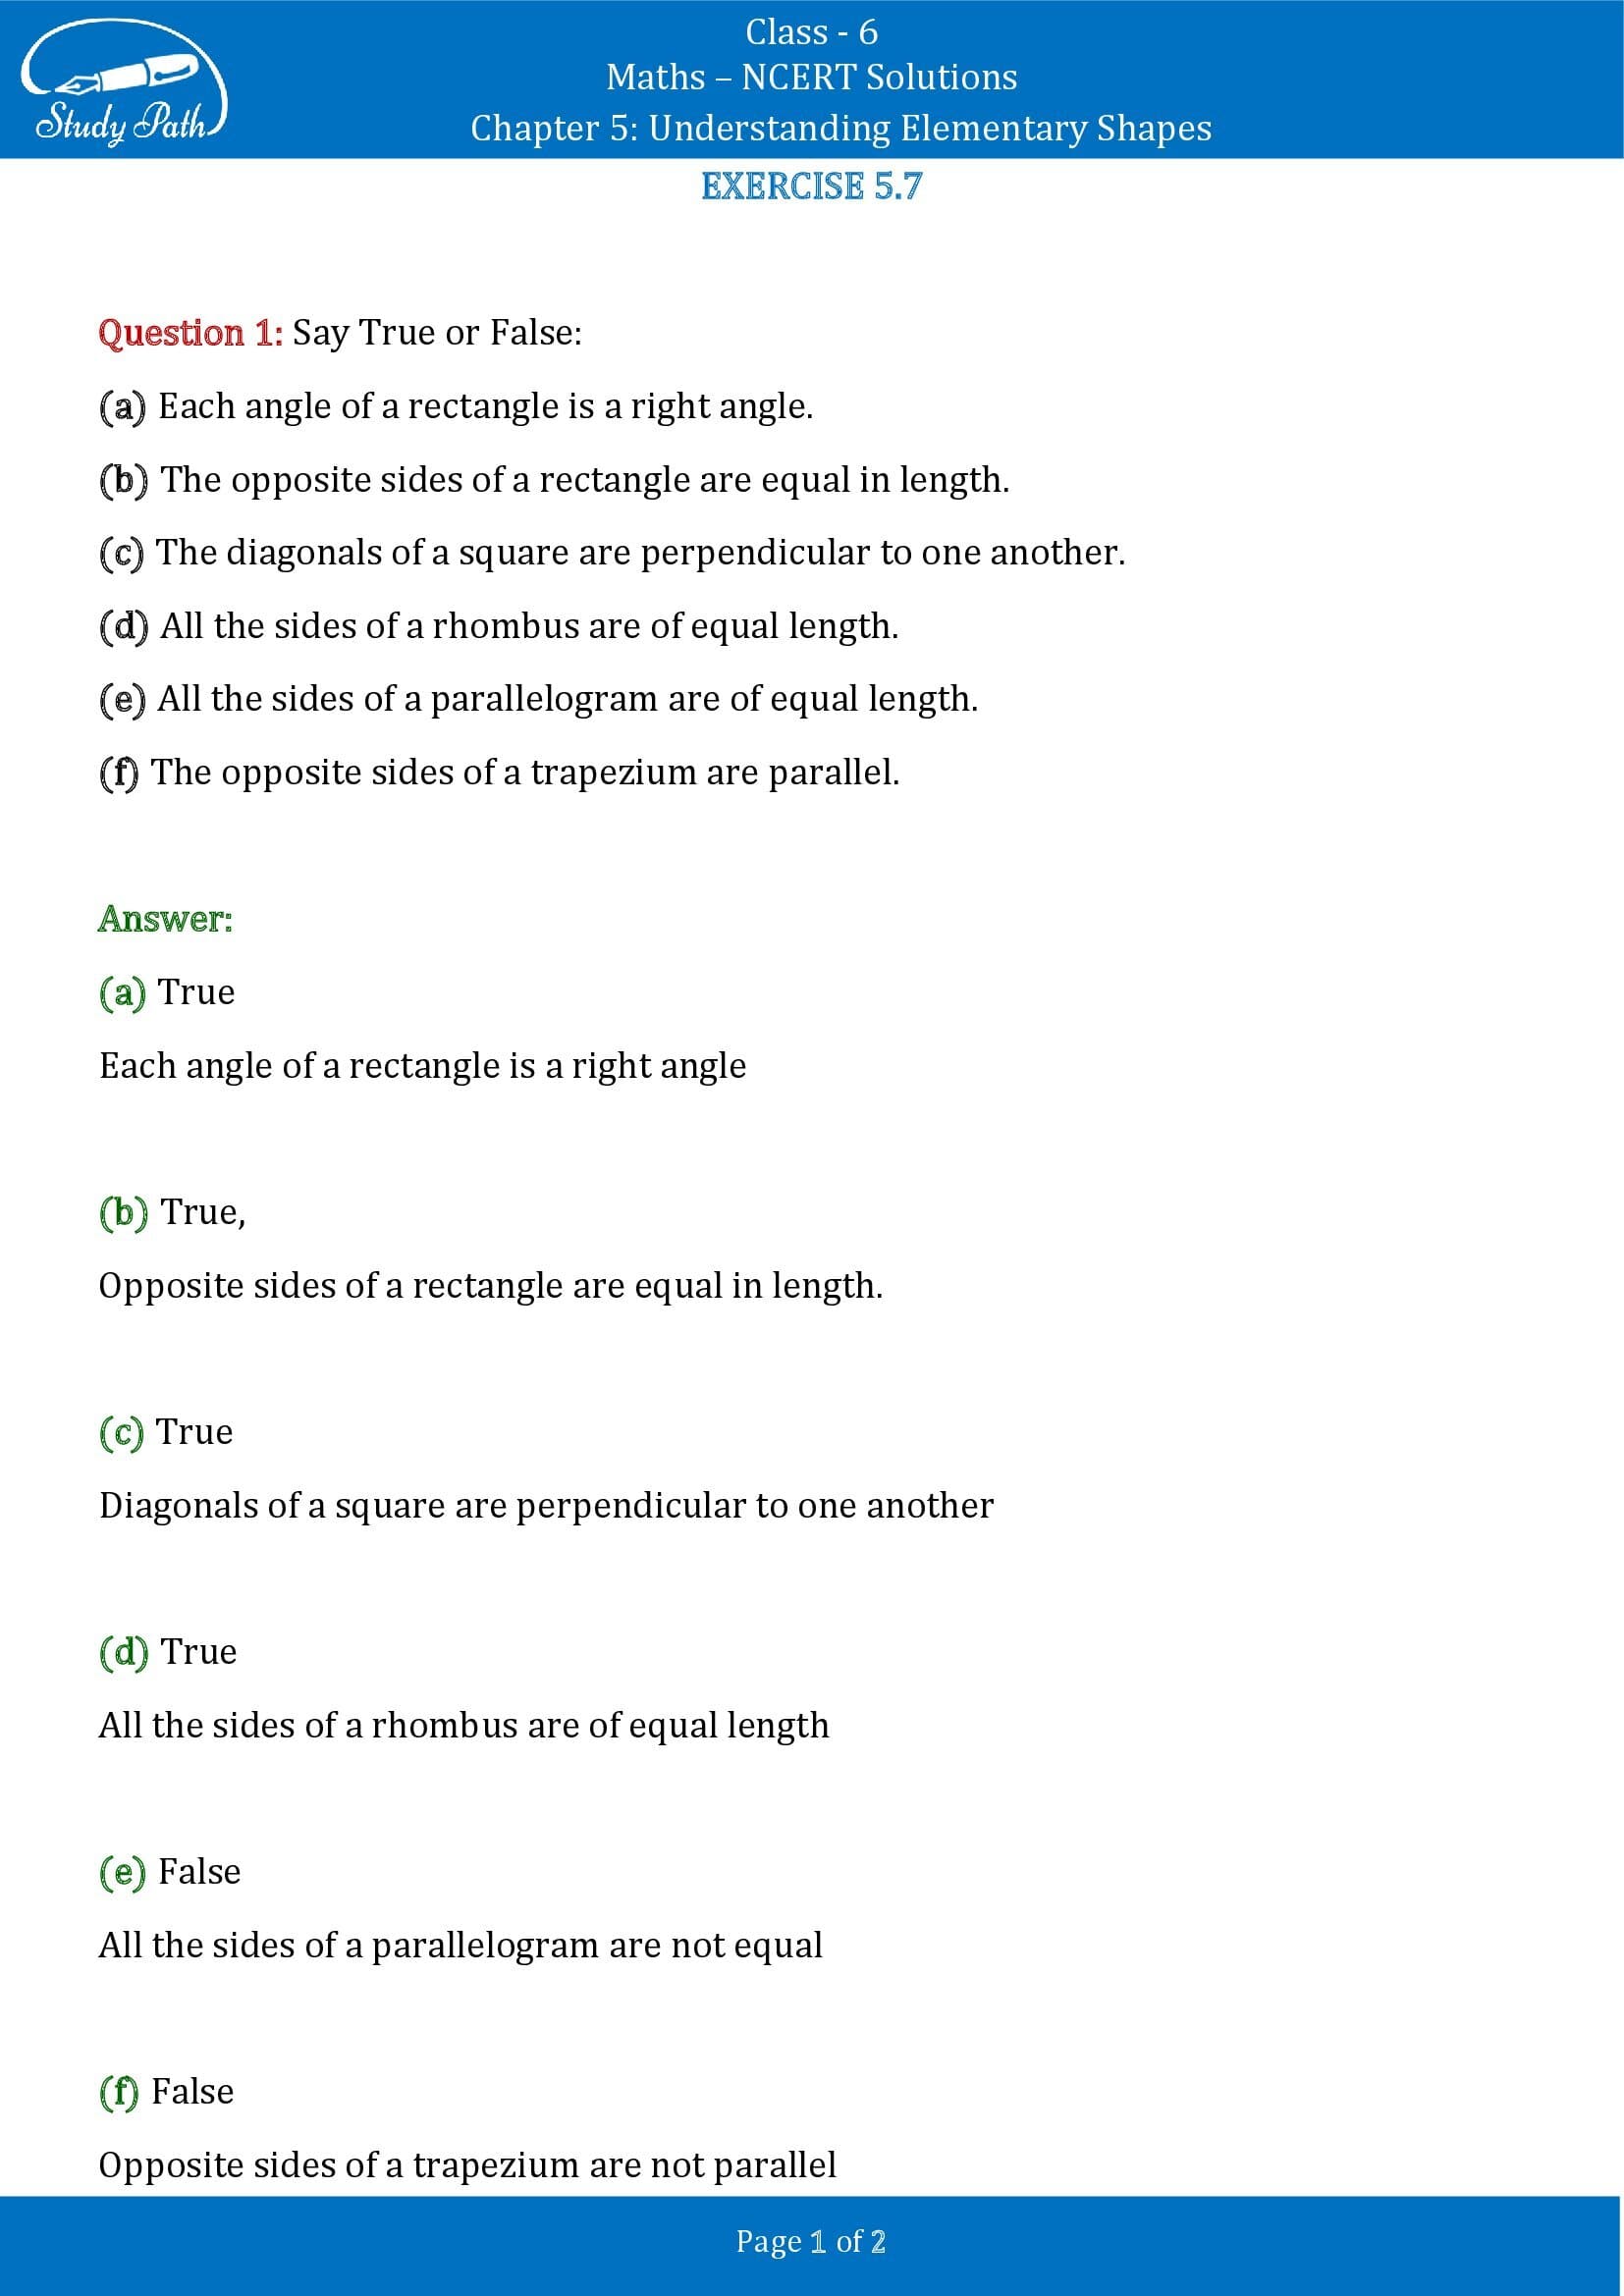 NCERT Solutions for Class 6 Maths Chapter 5 Understanding Elementary Shapes Exercise 5.7 00001